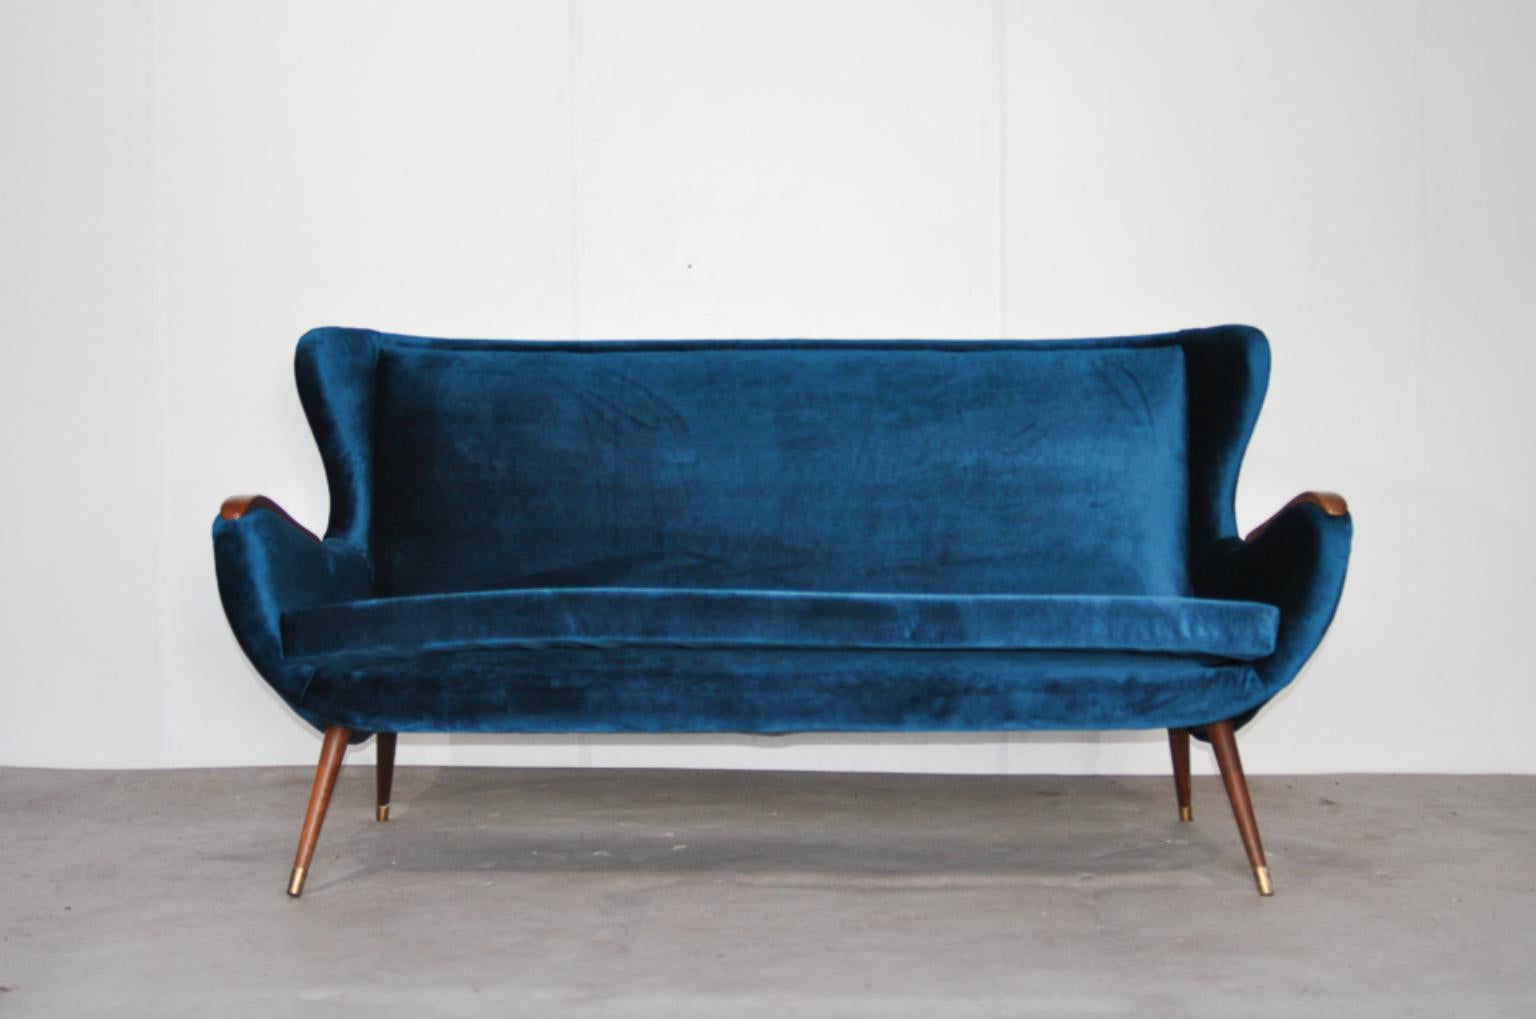 Vintage velvet petrol sofa, Italy, 1960s

Re-upholstered in petrol colored velvet. With wooden arm-rests and legs and brass details.

Measures: Length 170 cm; seating 145 cm
Depth 80 cm; seating 55 cm
Height 85 cm; seating 44 cm.